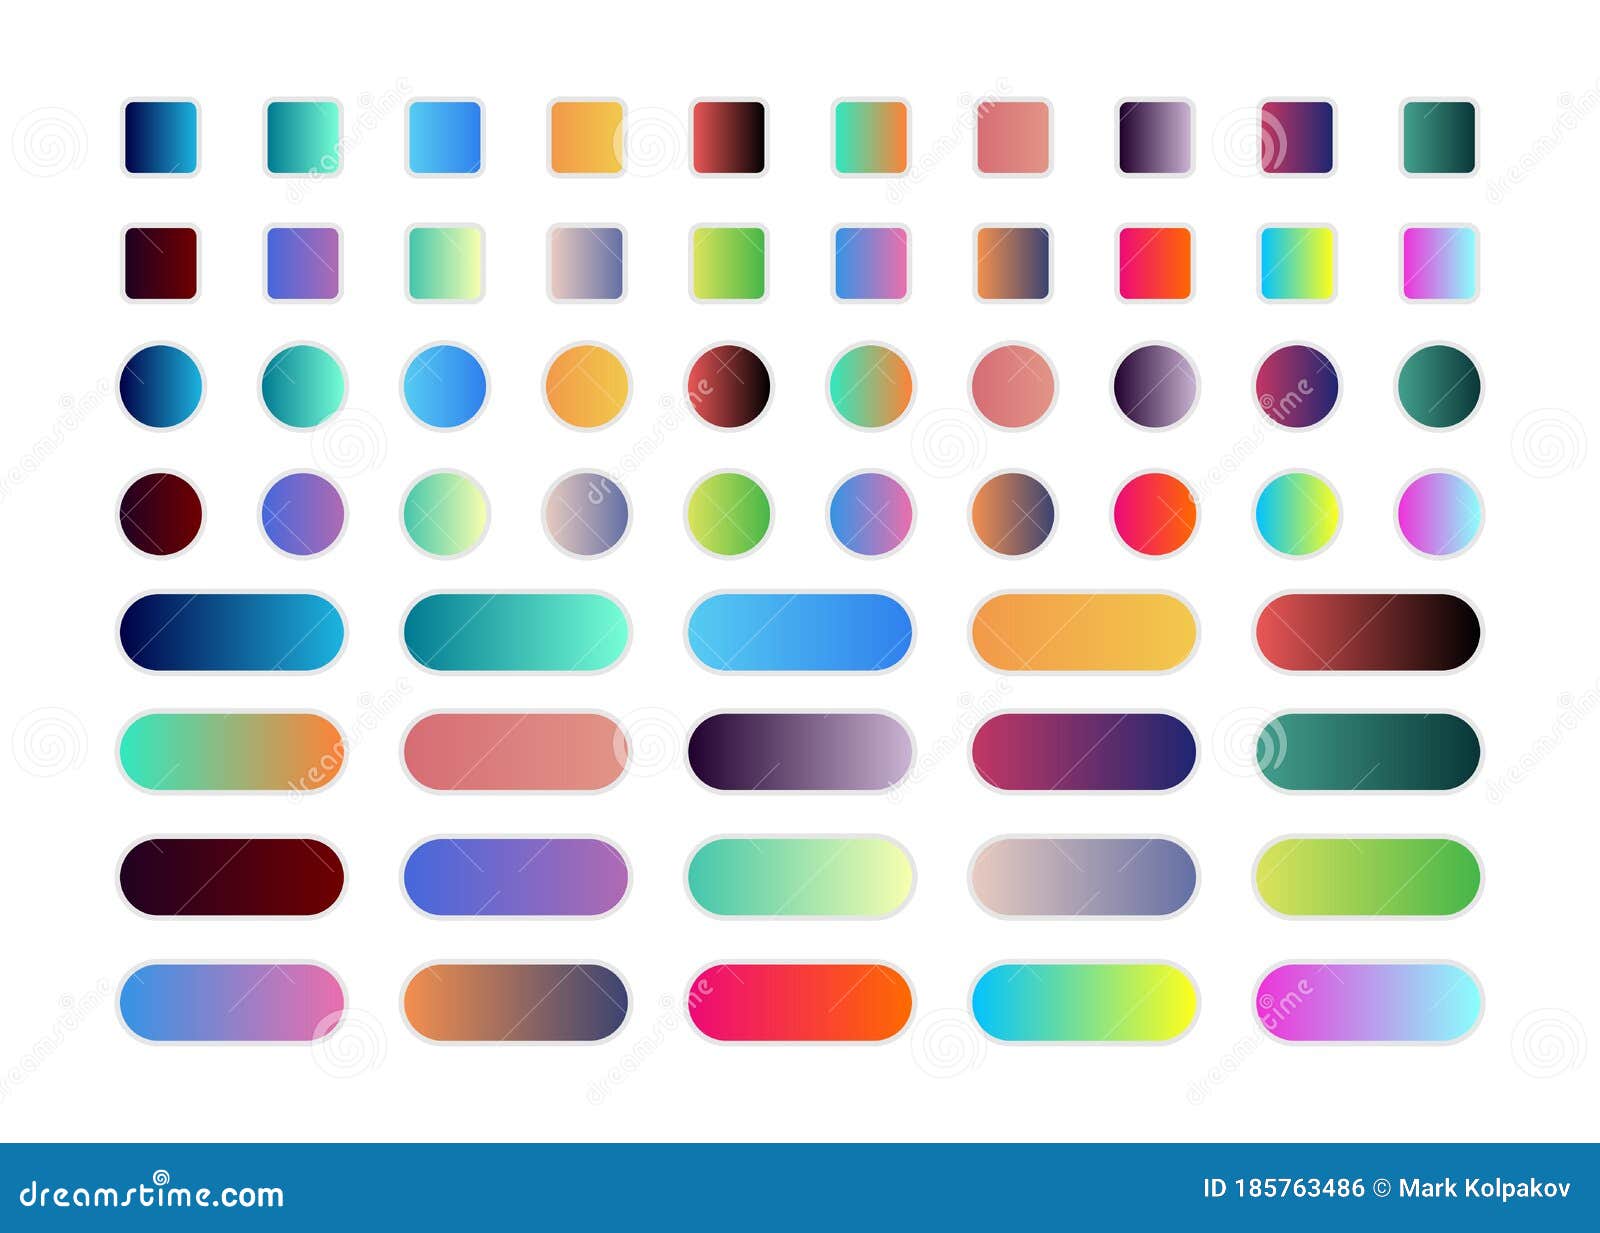 60 Gradient Button Set Isolated Icon. Web Vector Stock Vector ...